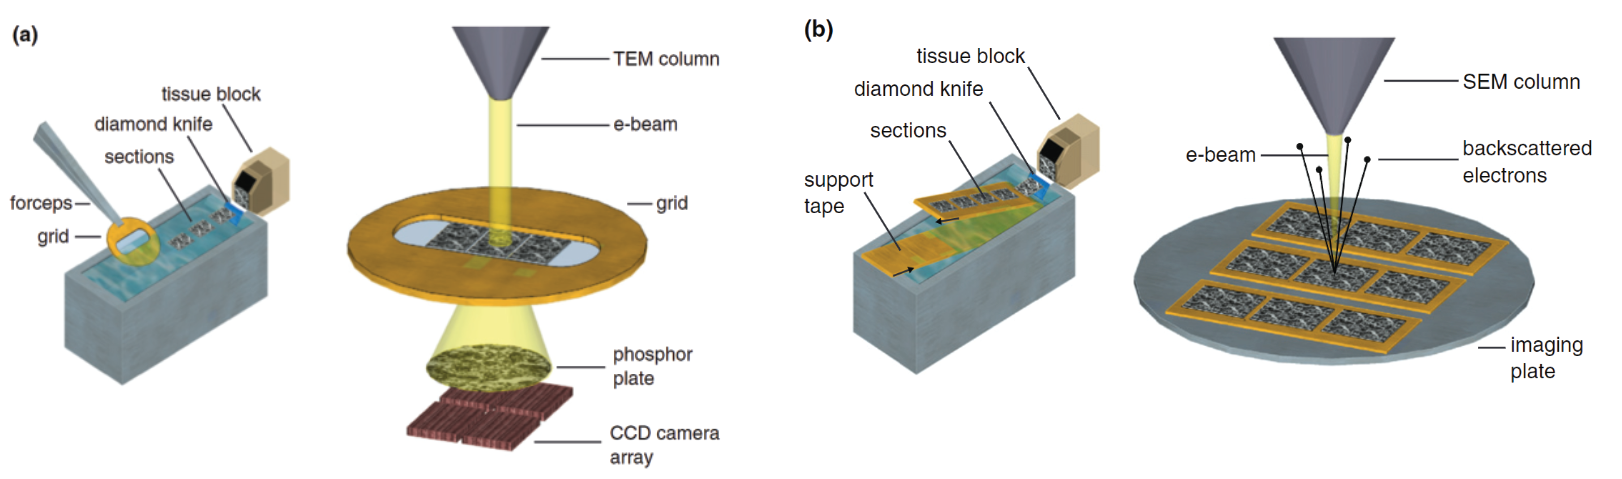 an overview of TEM and SEM techniques for high-throughput EM volumetric reconstruction